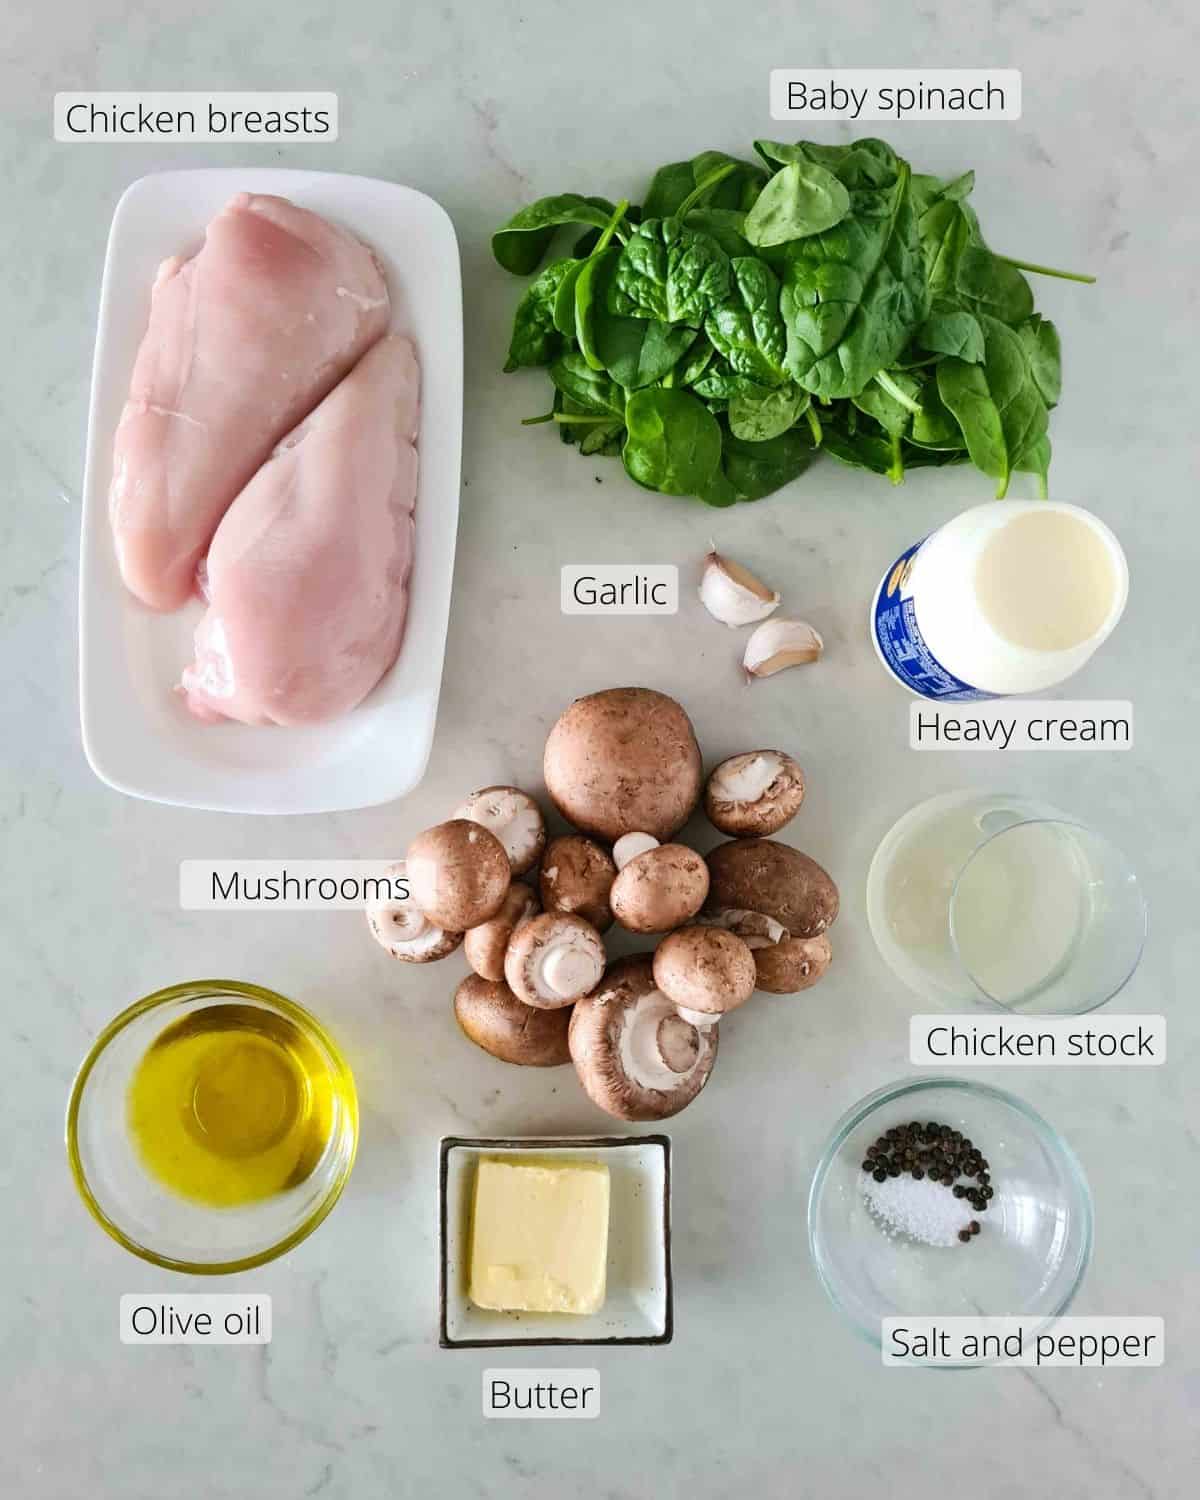 All the ingredients required for this recipe.